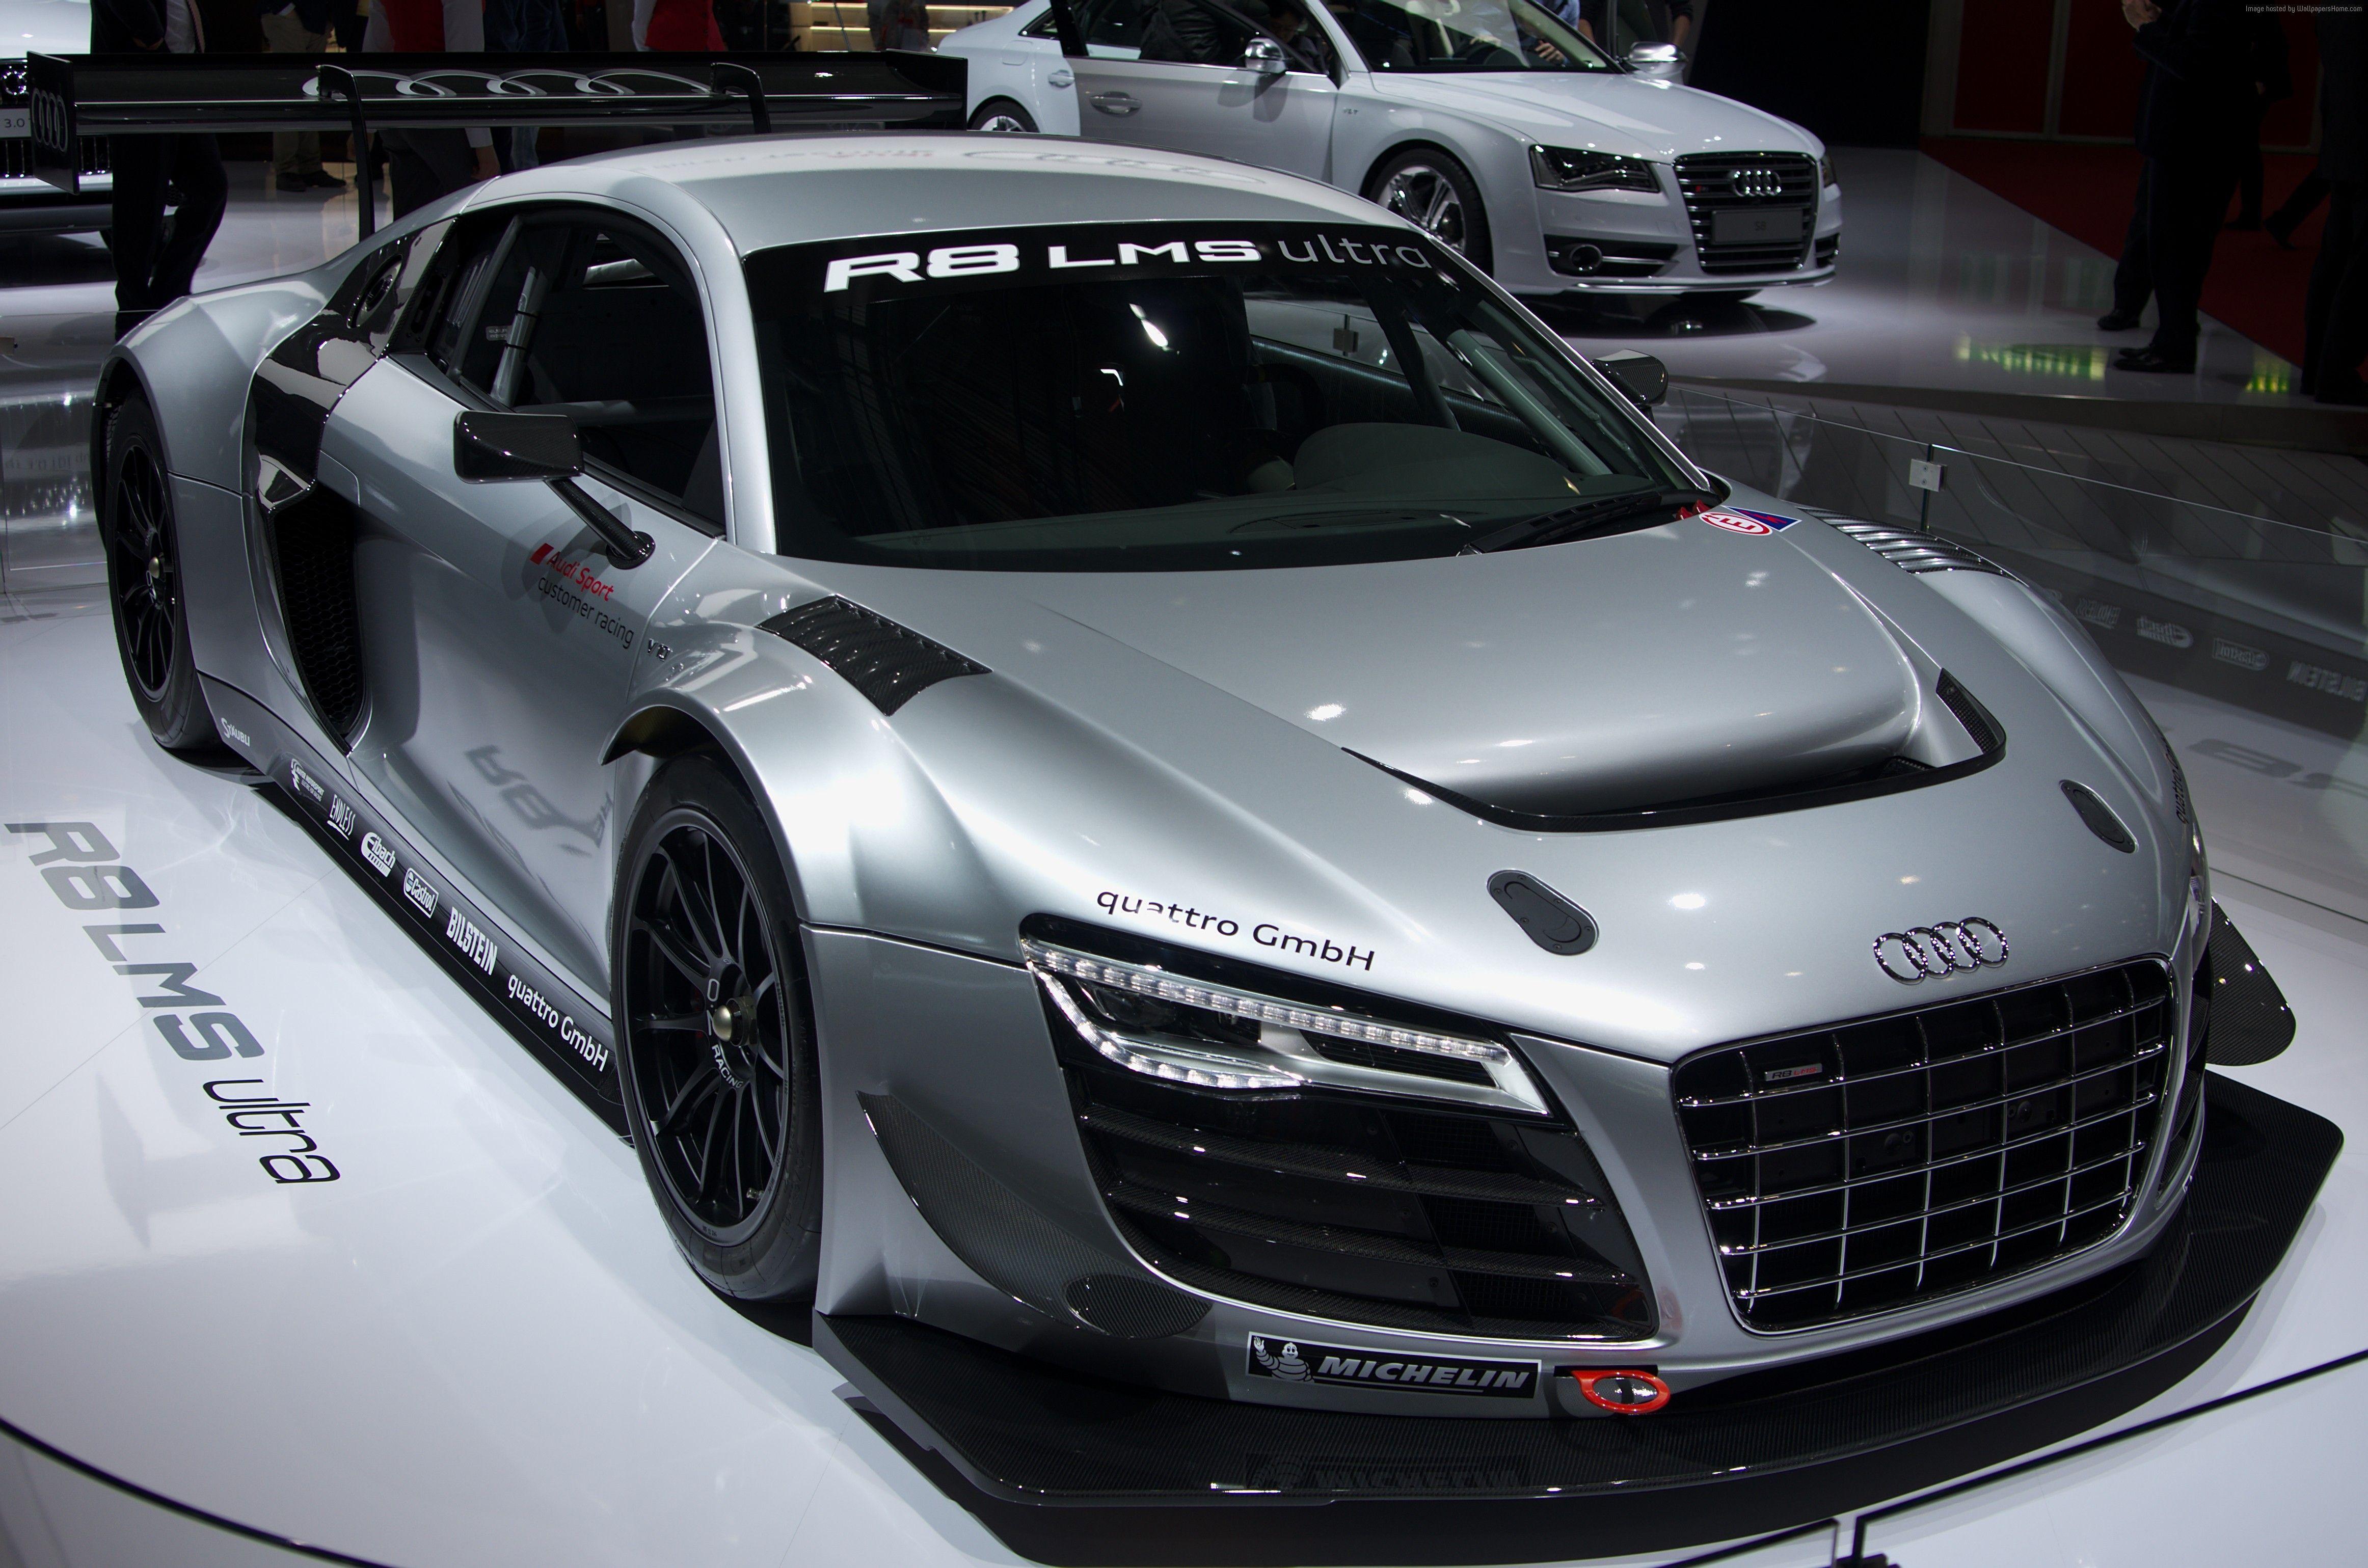 audi r8 v10 plus wallpapers wallpaper cave on audi r9 wallpapers